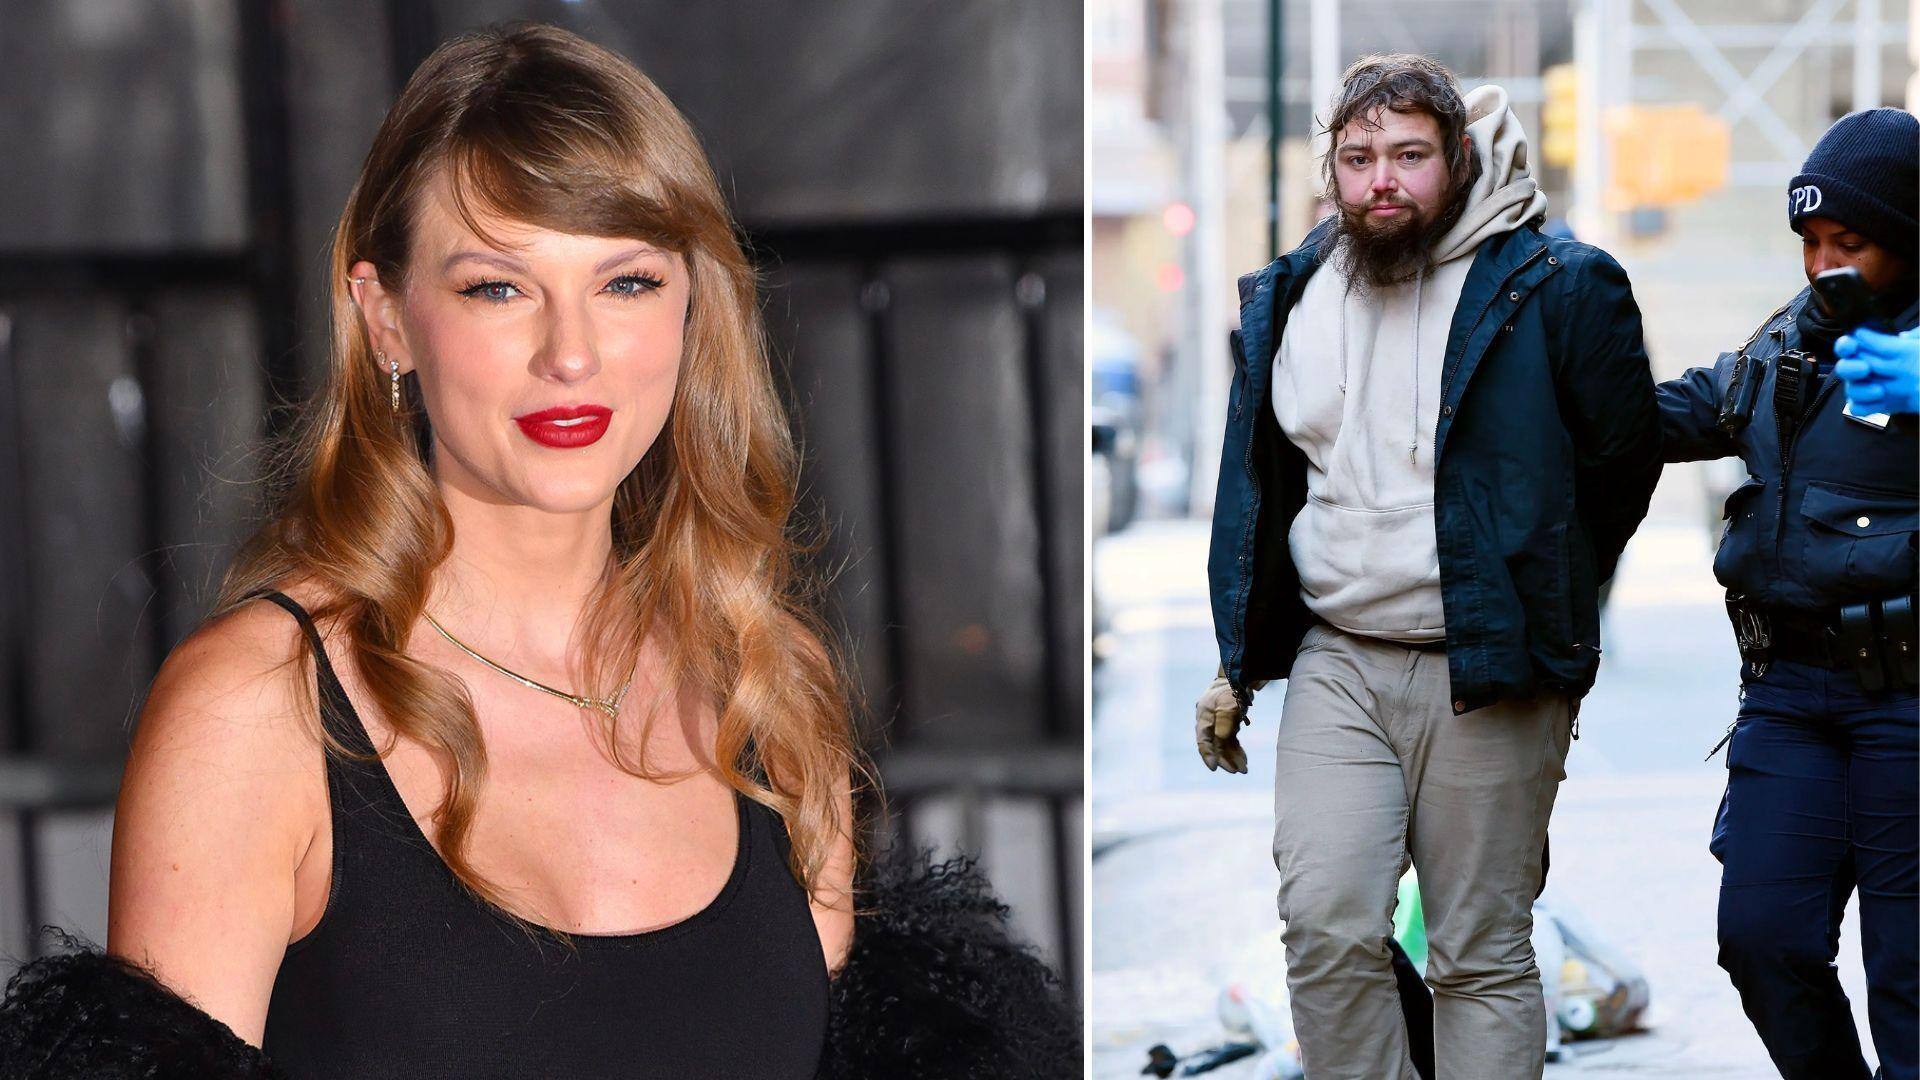 Stalker attempting to break into Taylor Swift's NYC home arrested